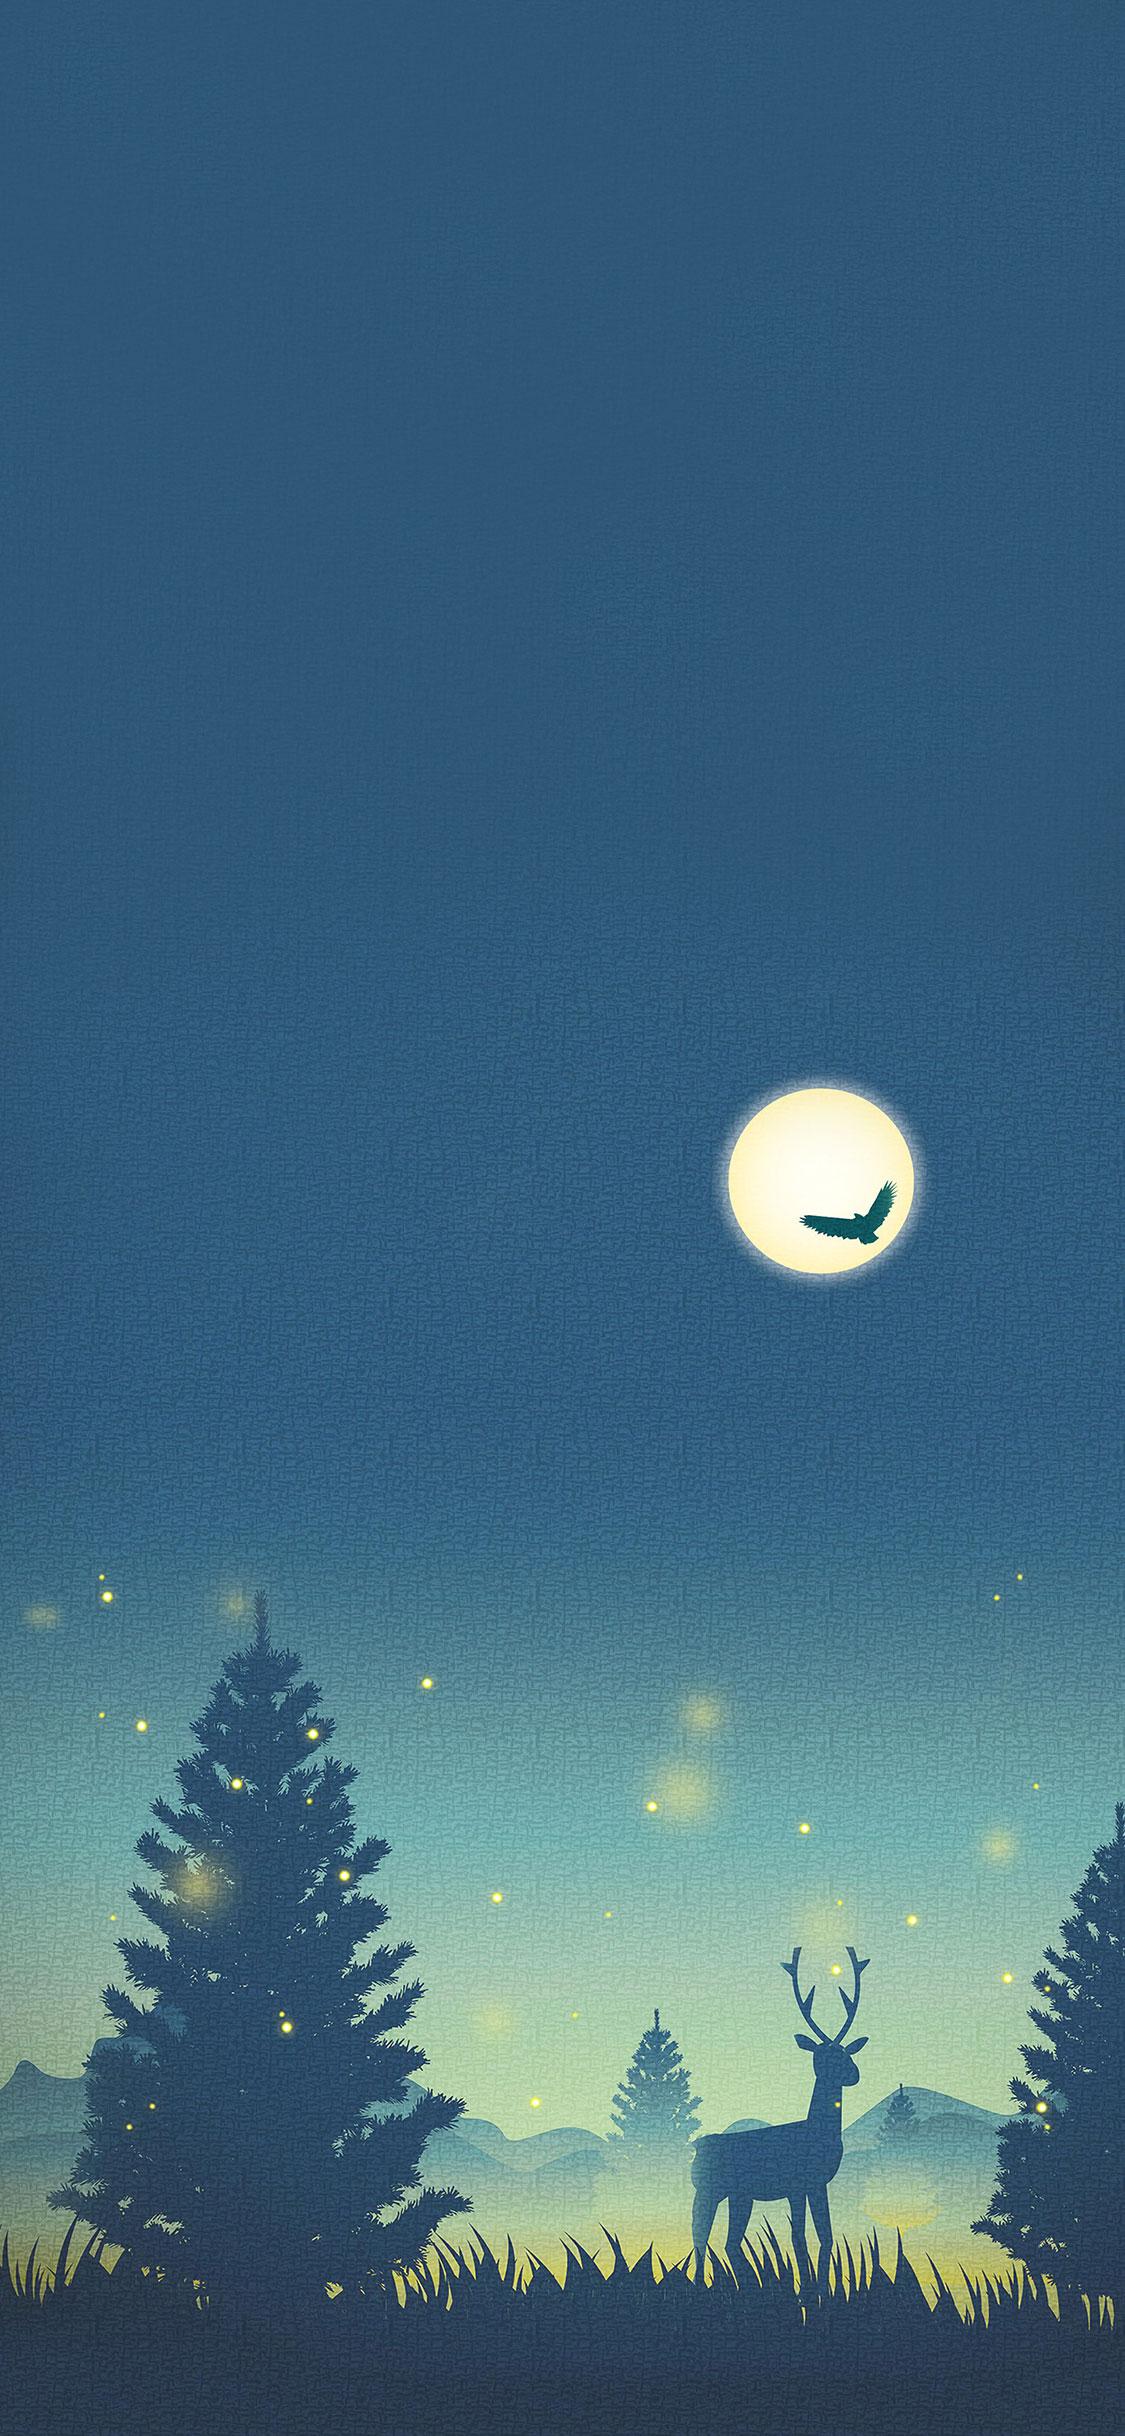 2019 Christmas Wallpaper For IPhone 6 7 8 SE X XS XR